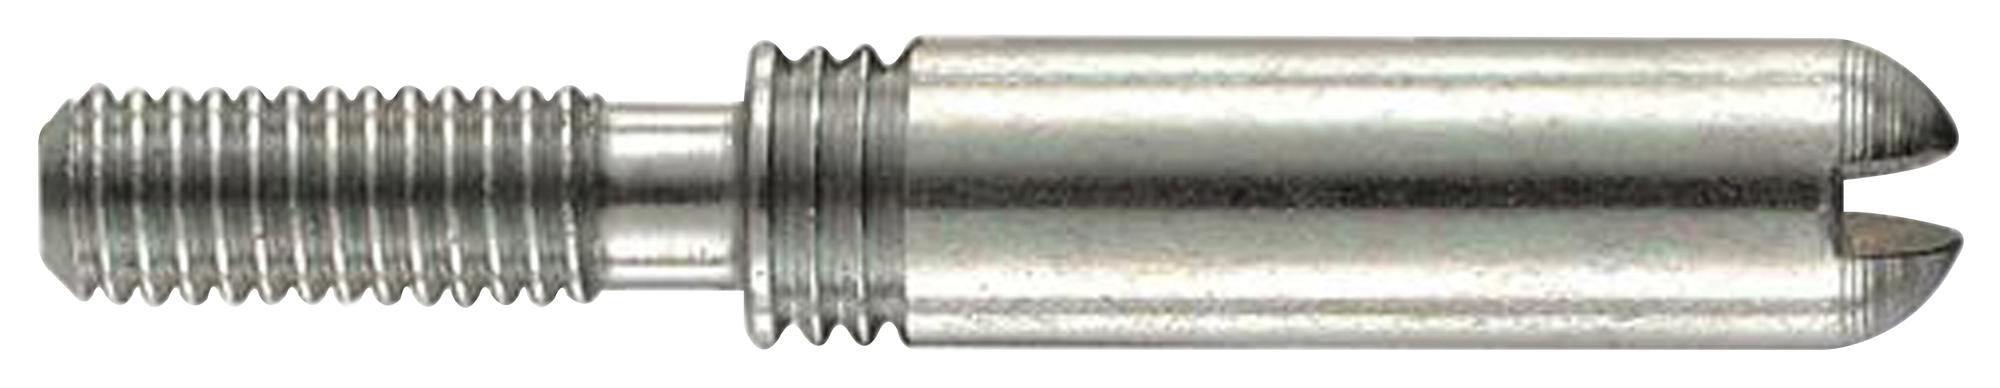 09330009808 GUIDE PIN, INDUSTRIAL CONNECTOR HARTING